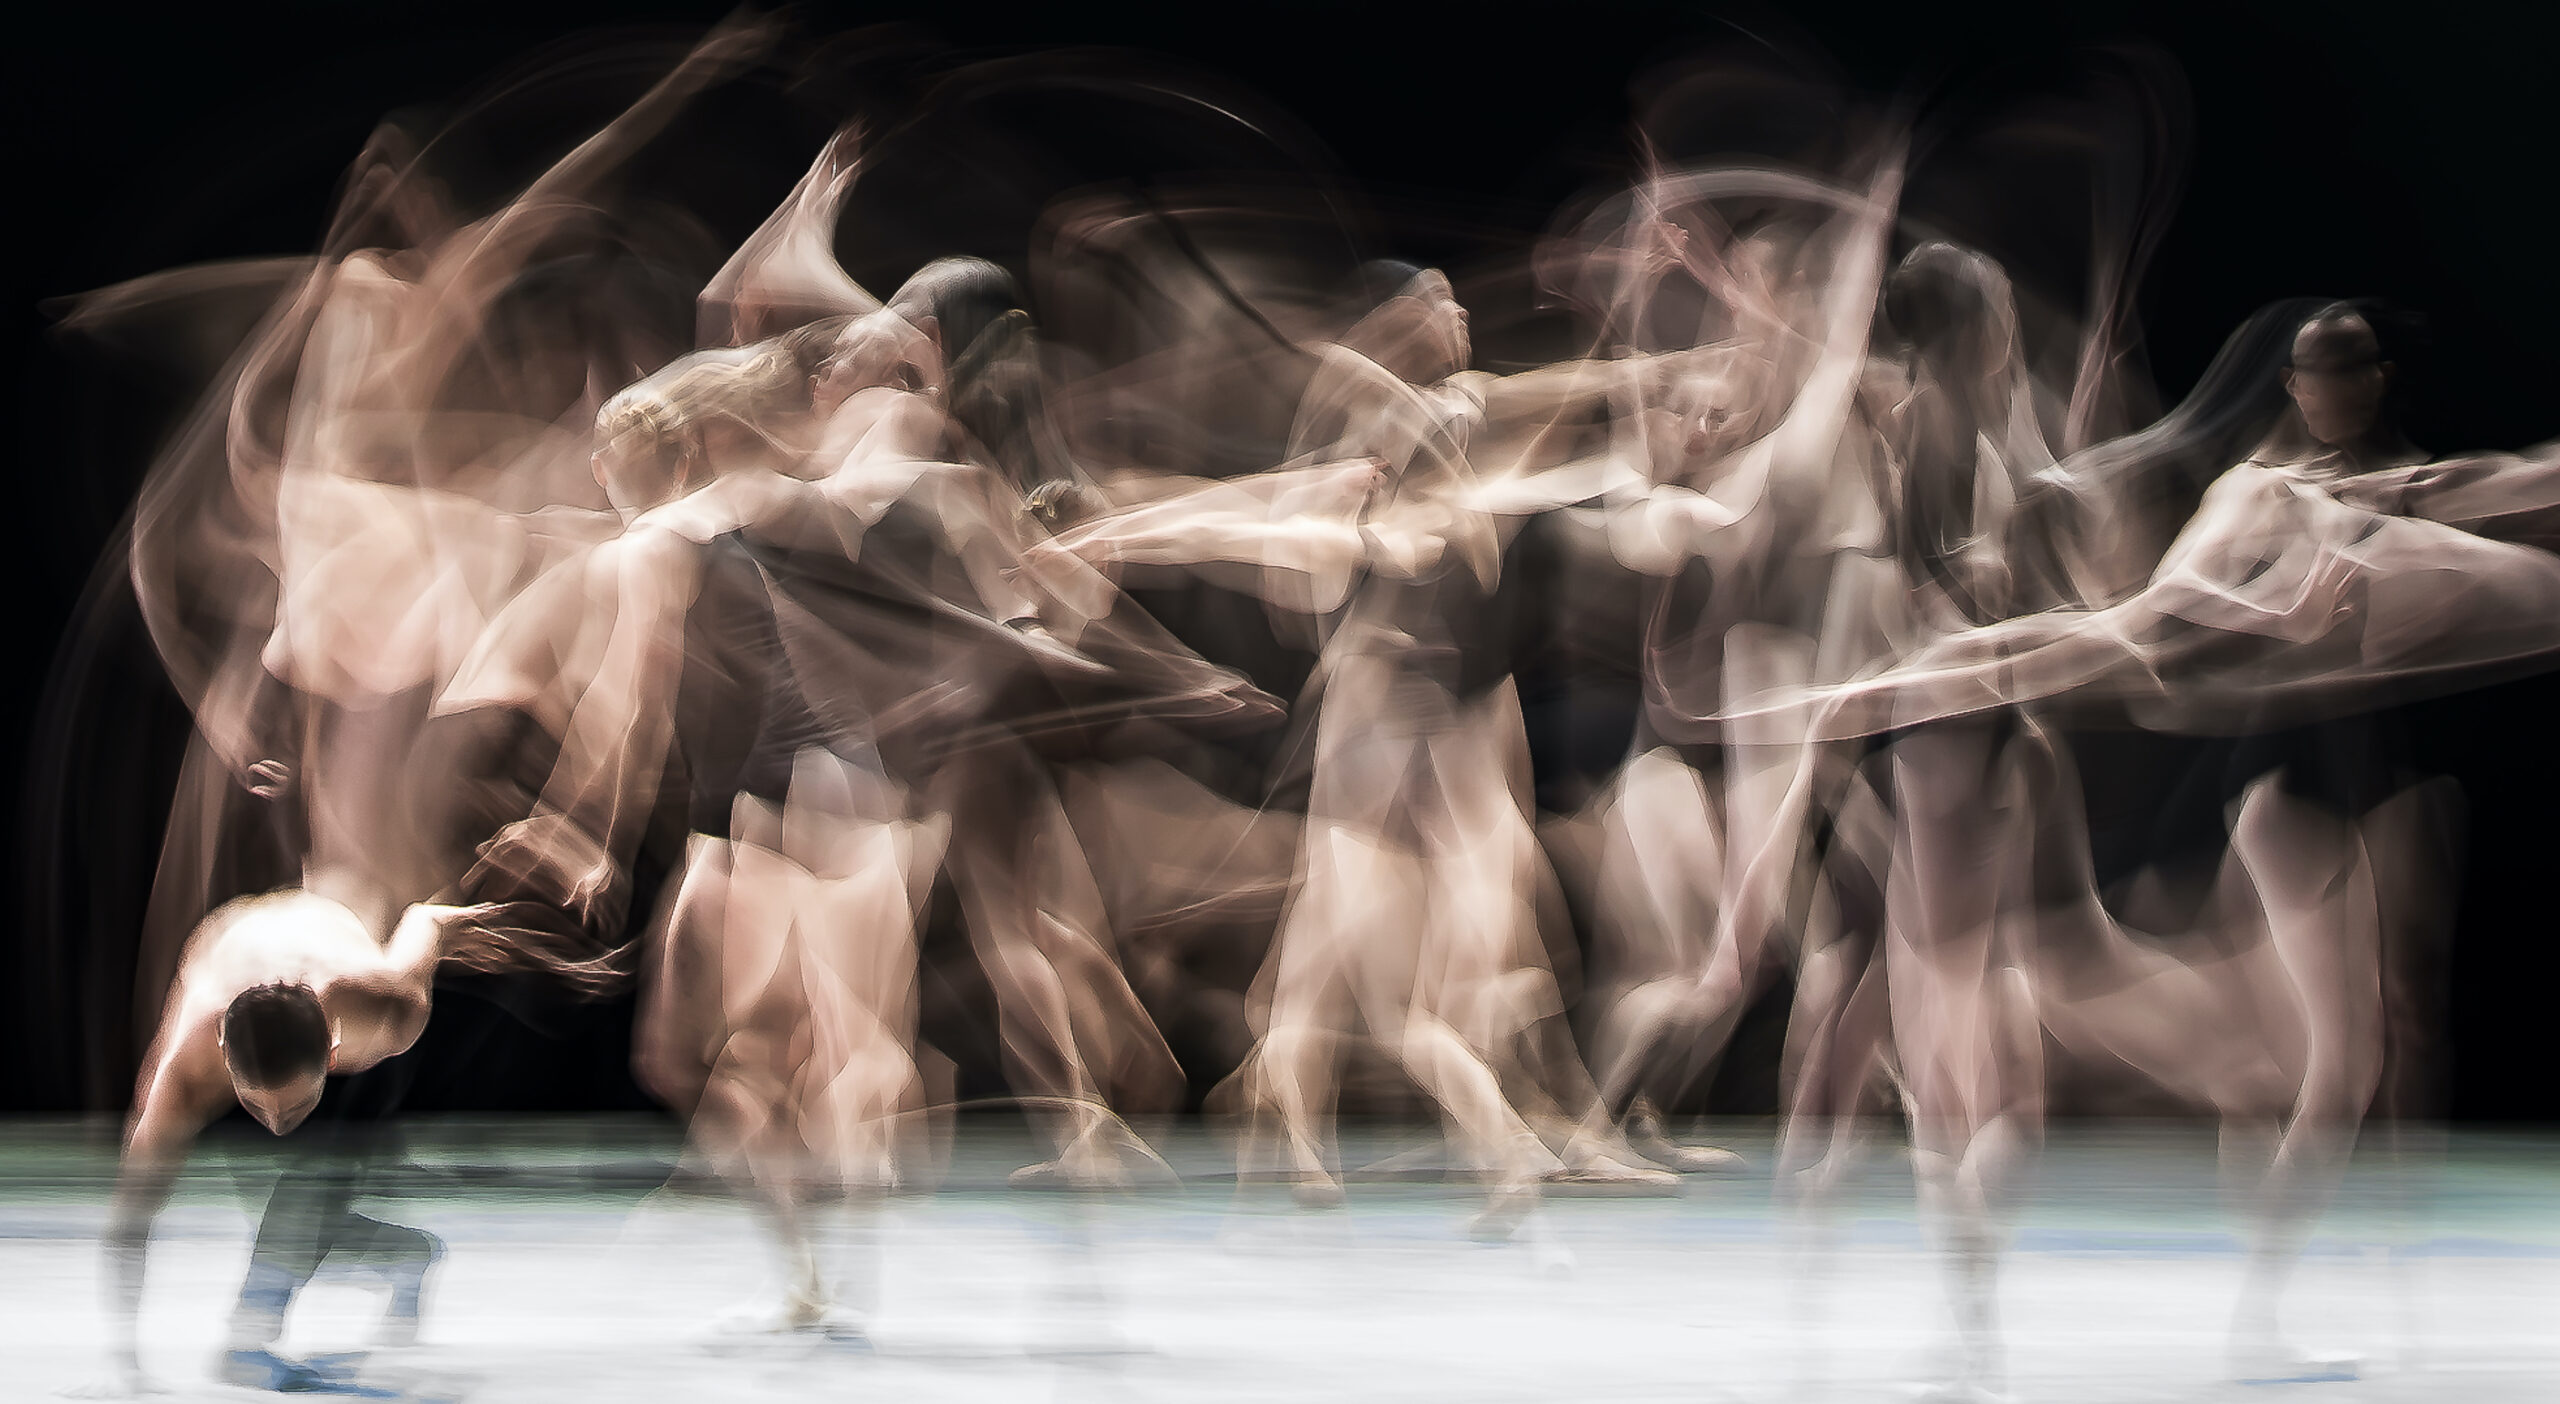 A landscape photo shows a group of dancers in motion onstage, their bodies blurred as they dance. They wear black leotards and shorts.